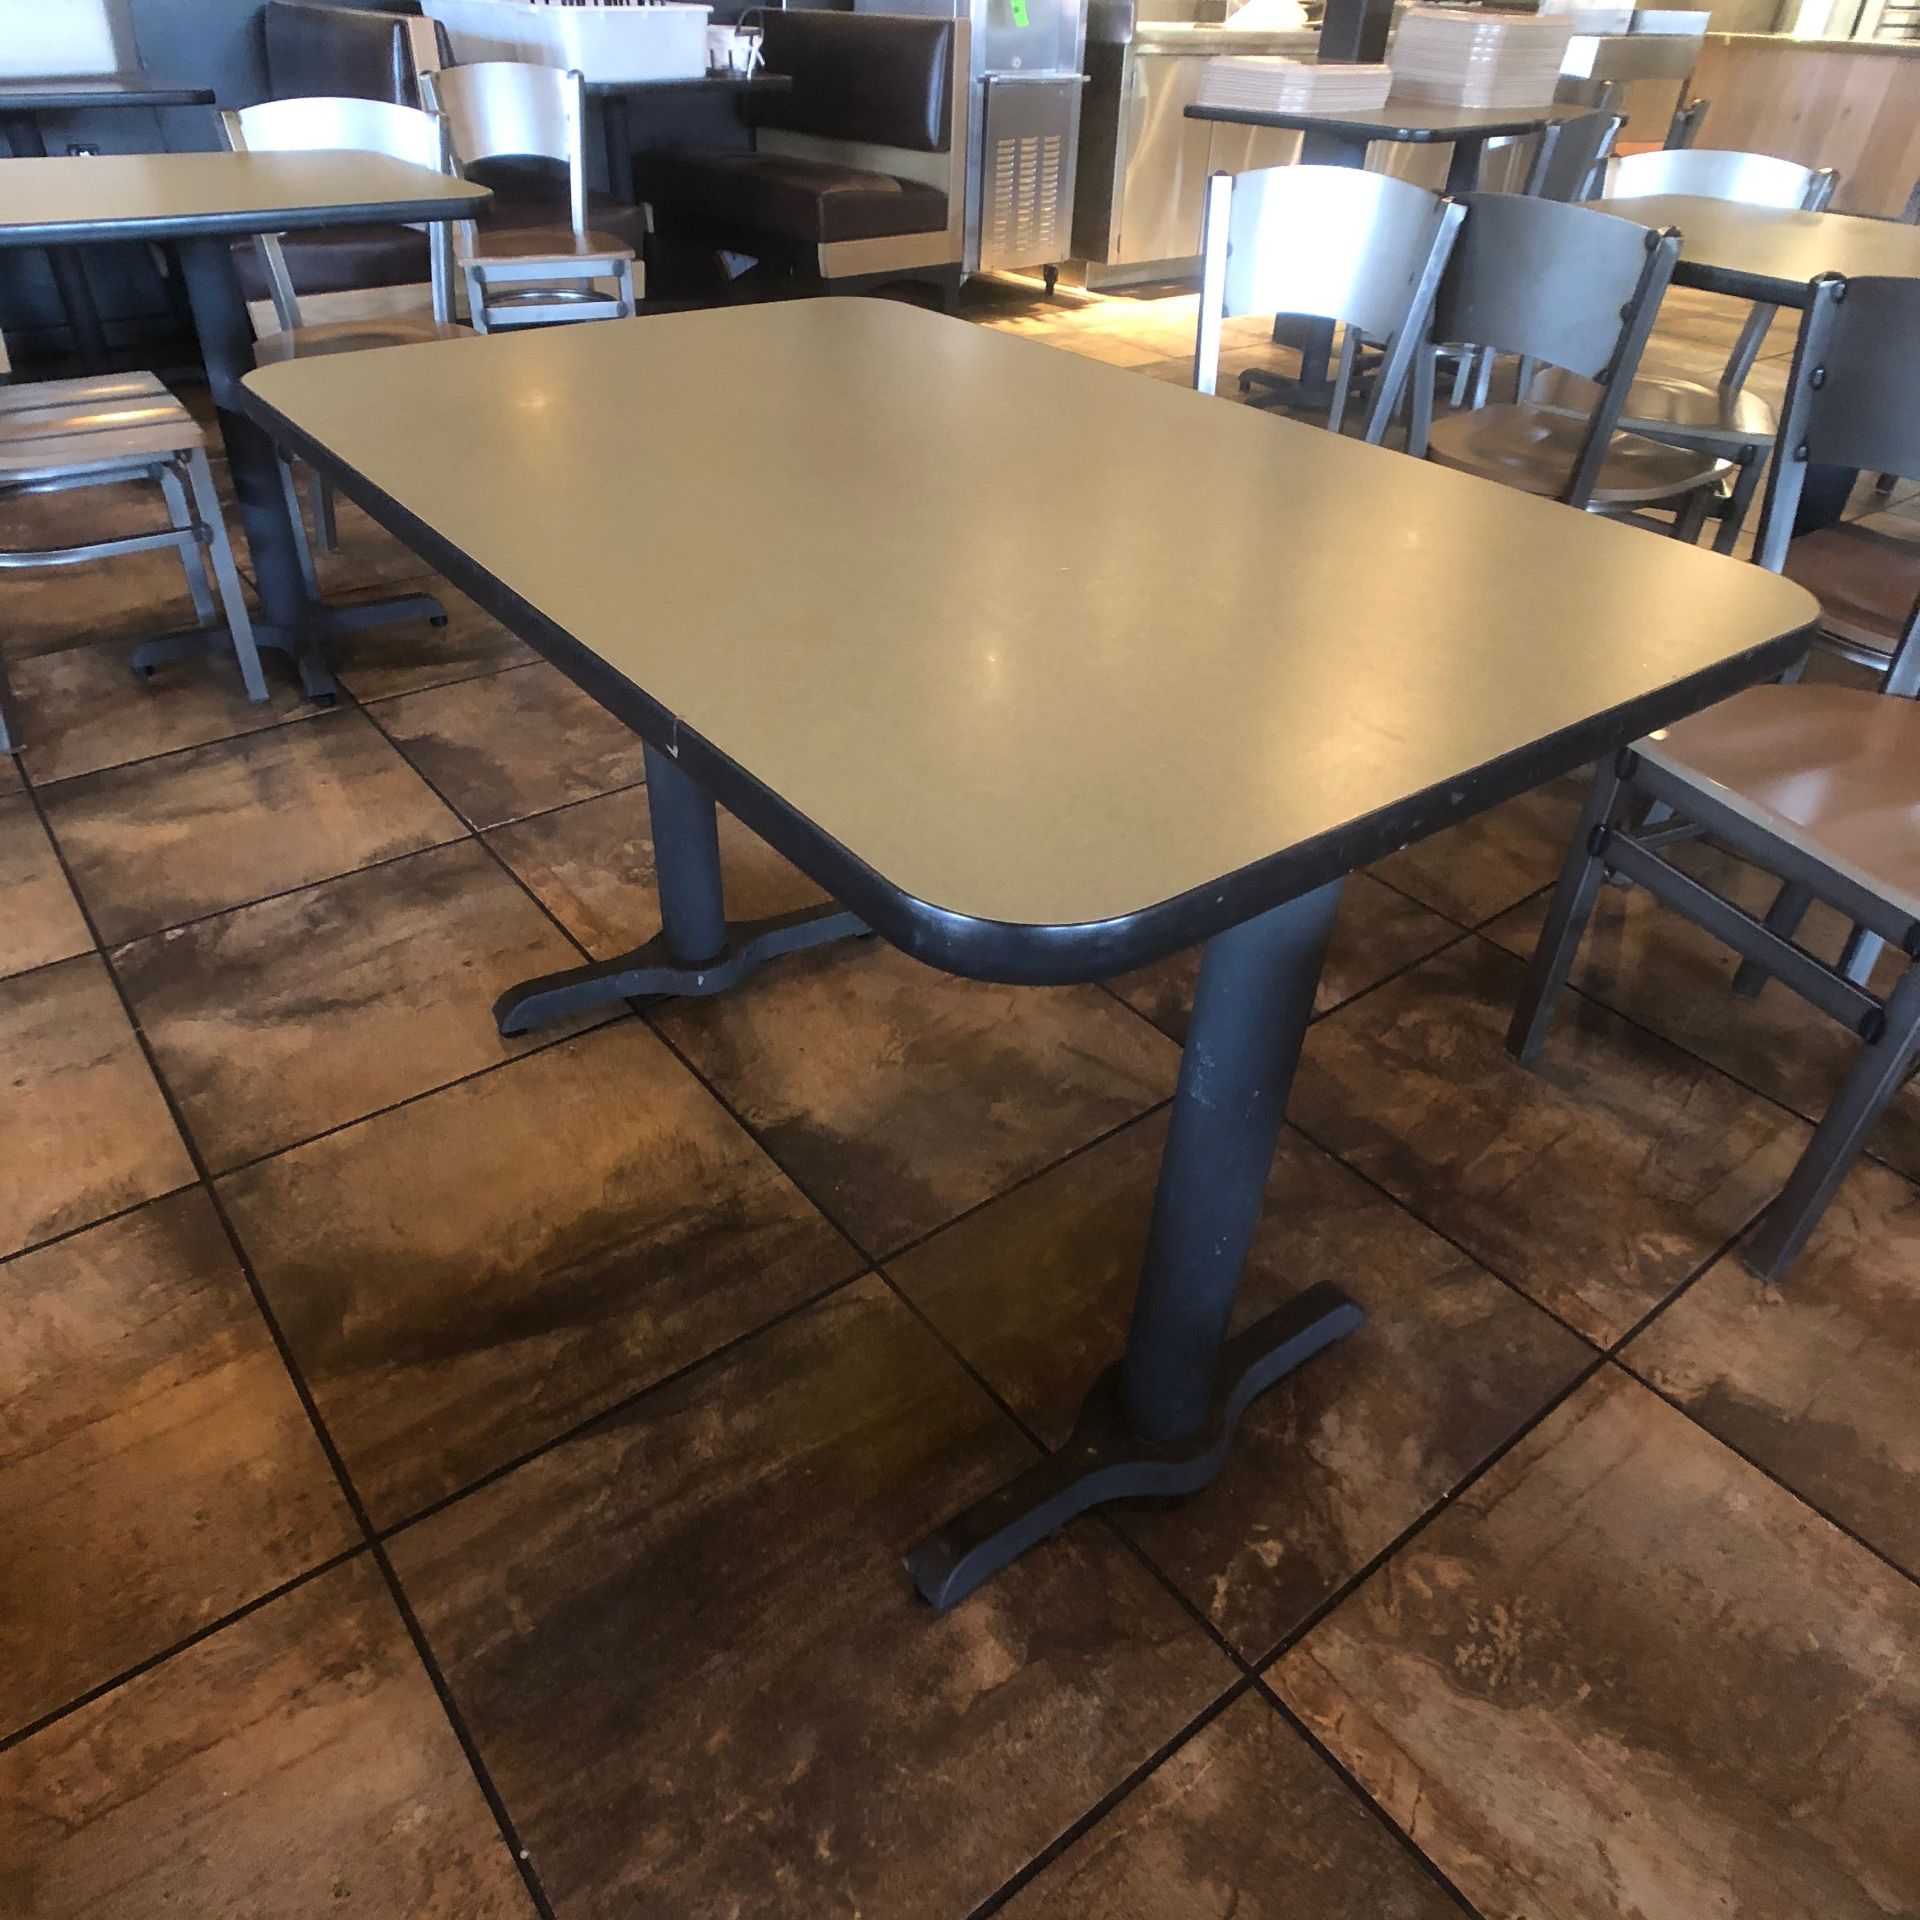 (6) 4-Person Tables with (24) Walsh Simmons Seating Chairs, Approx. 44" L x 28" W - Image 2 of 5